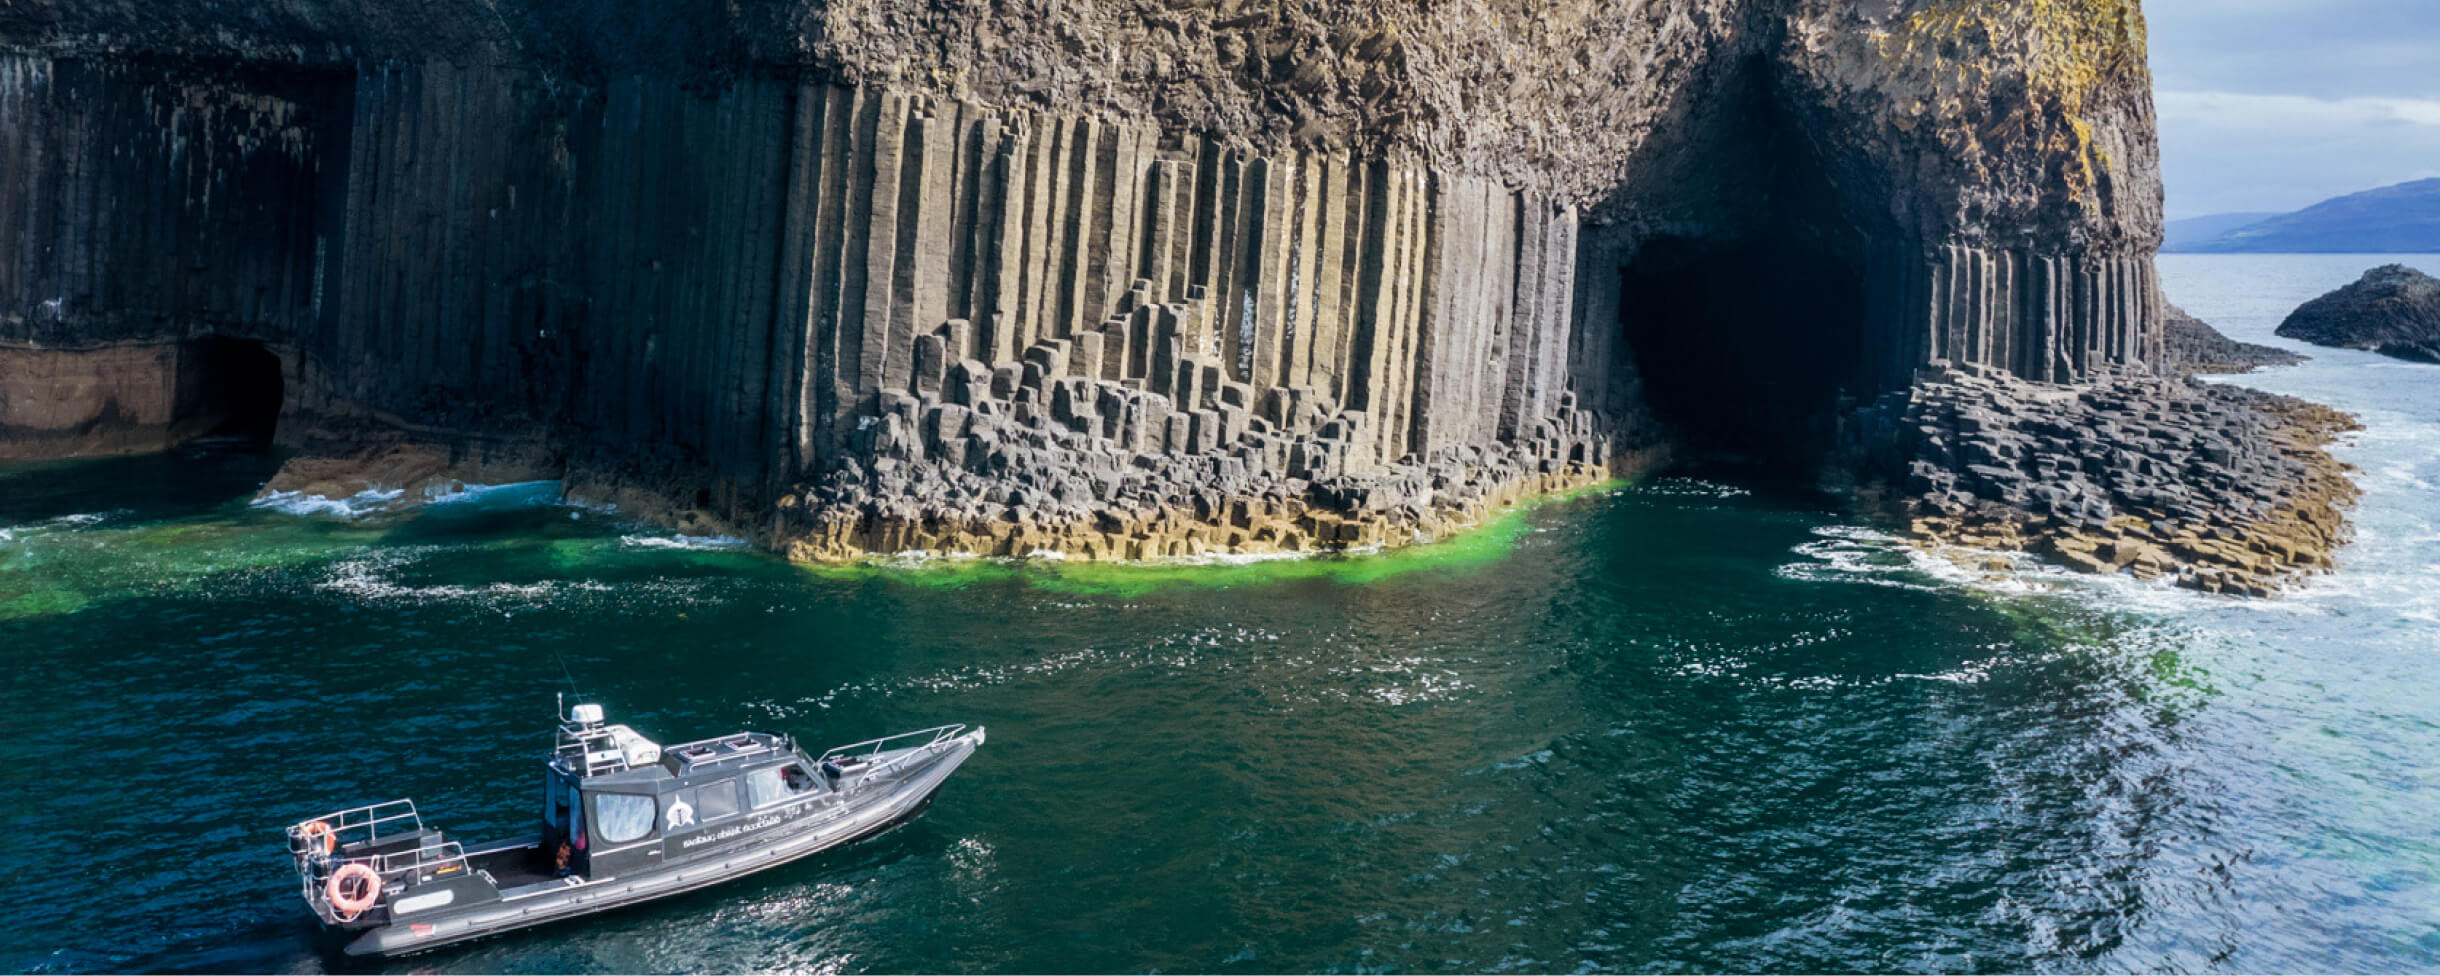 Swimming Fingal's cave